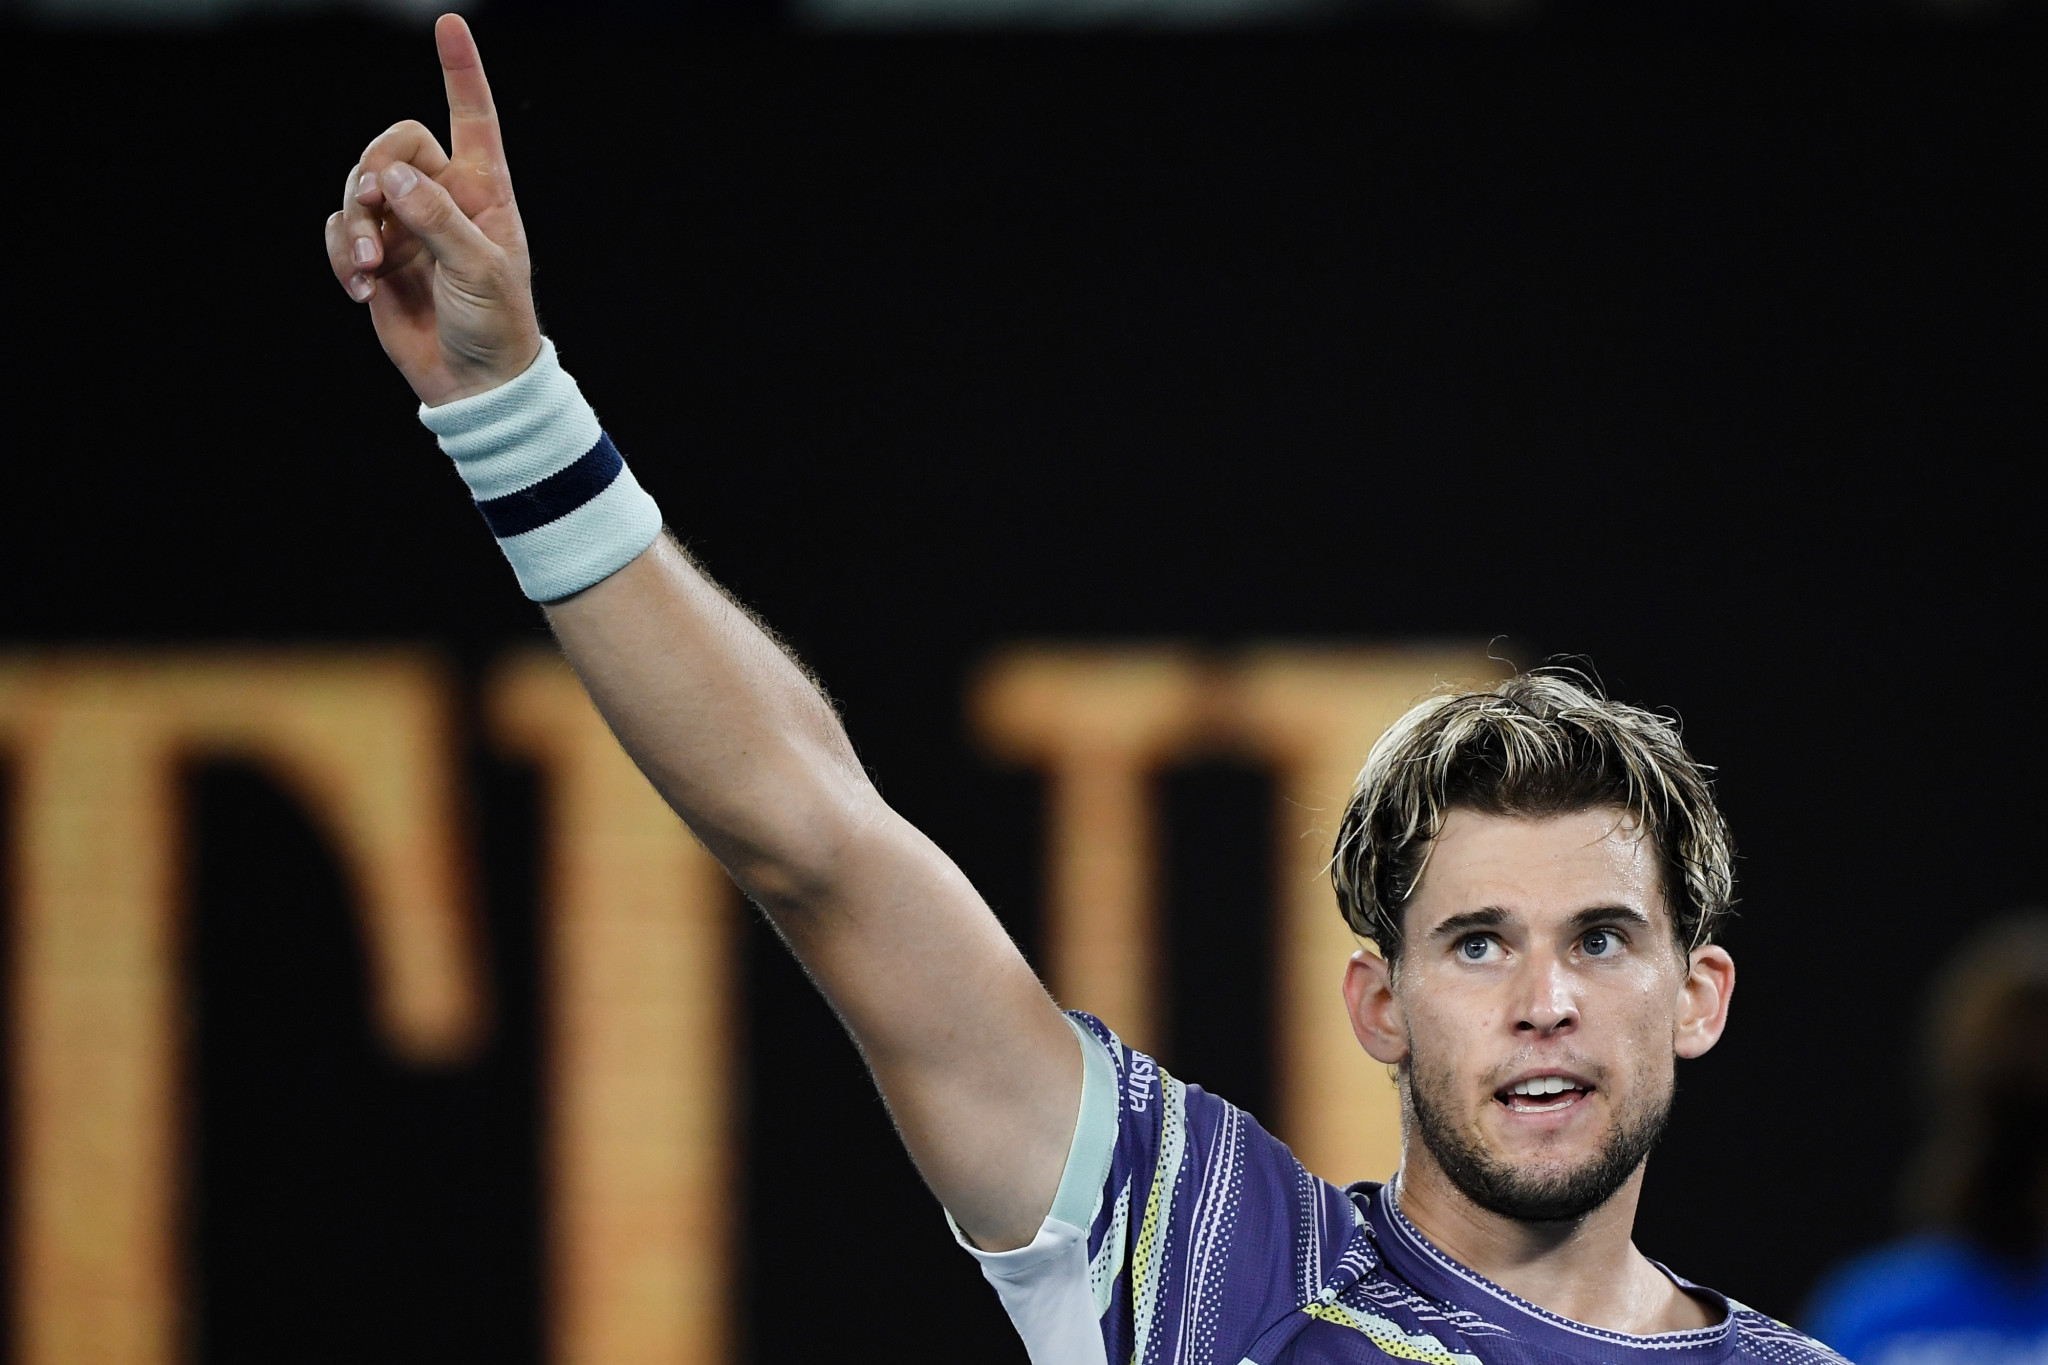 Thiem will hope to secure his maiden grand slam title ©Getty Images